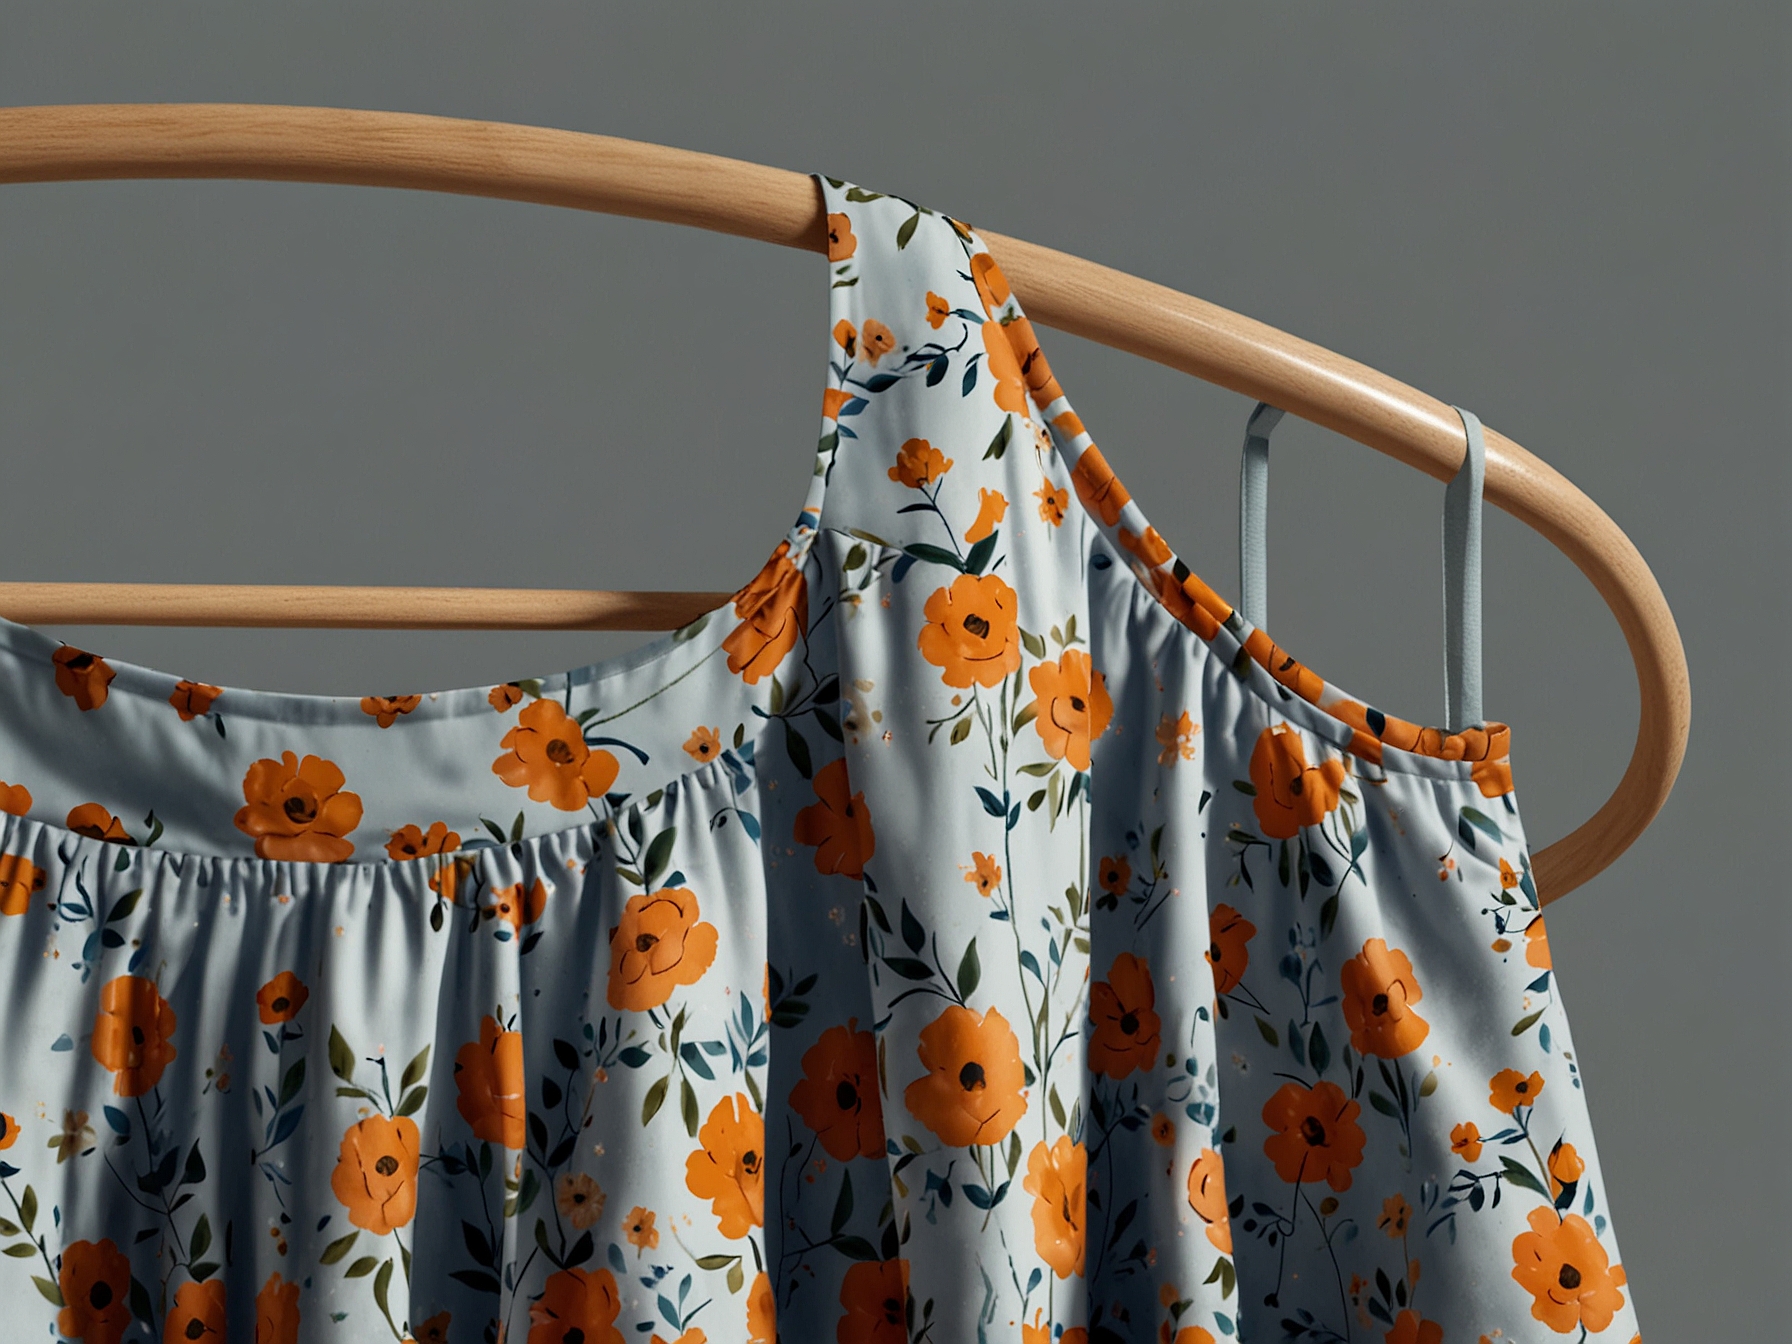 A close-up of the Reformation dress hung on a rack, displaying its delicate floral print, adjustable straps, and full skirt. The lightweight fabric makes it ideal for hot summer days and casual events.